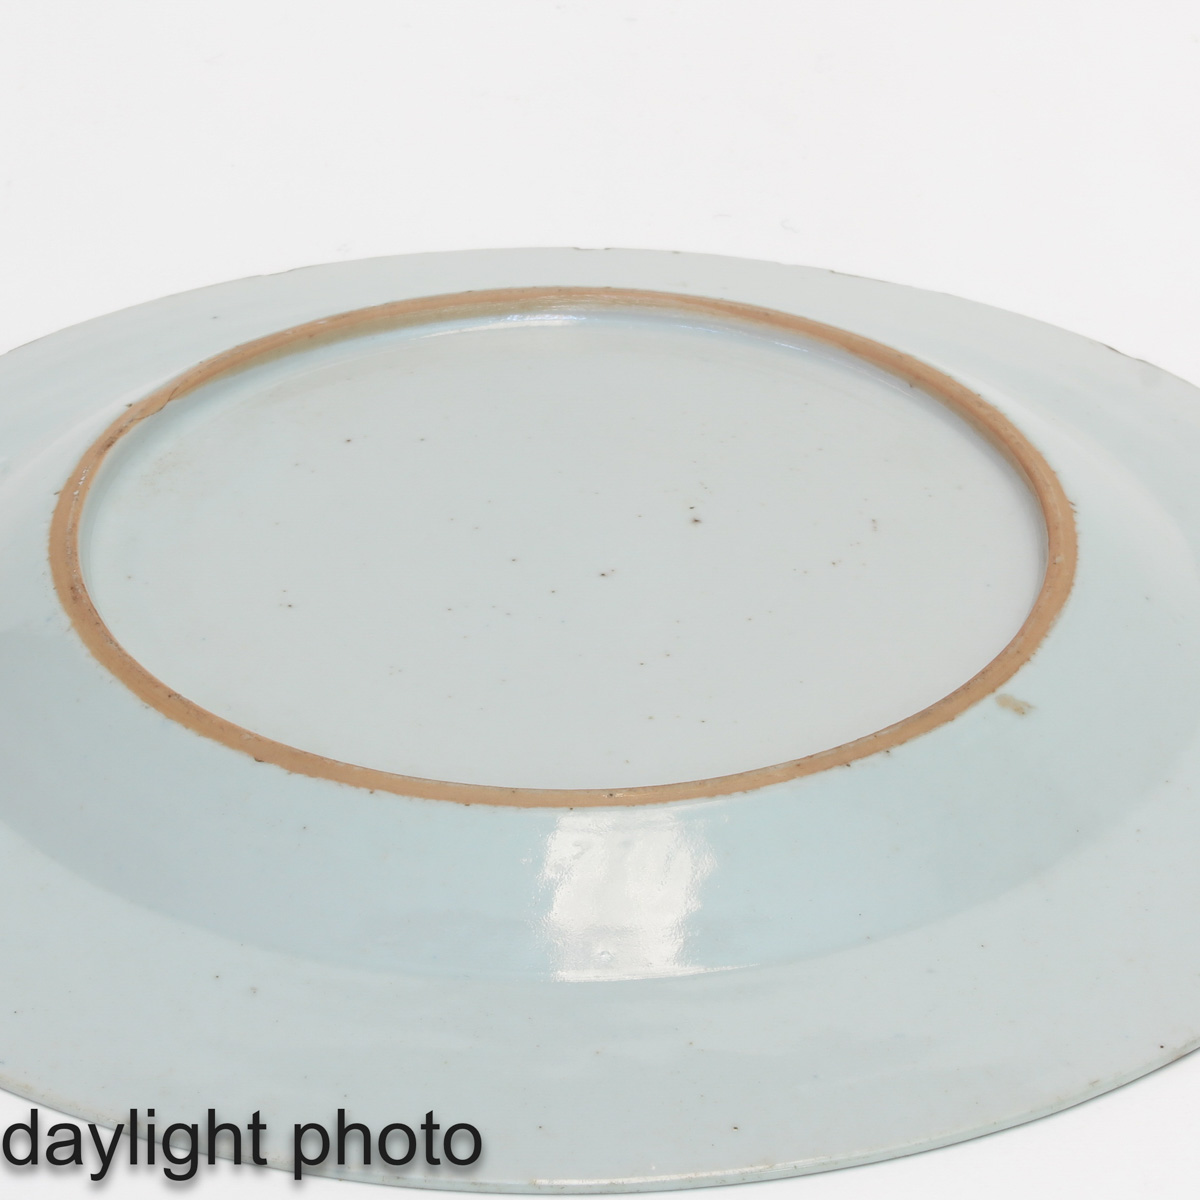 A Series of 3 Blue and White Plates - Image 10 of 10